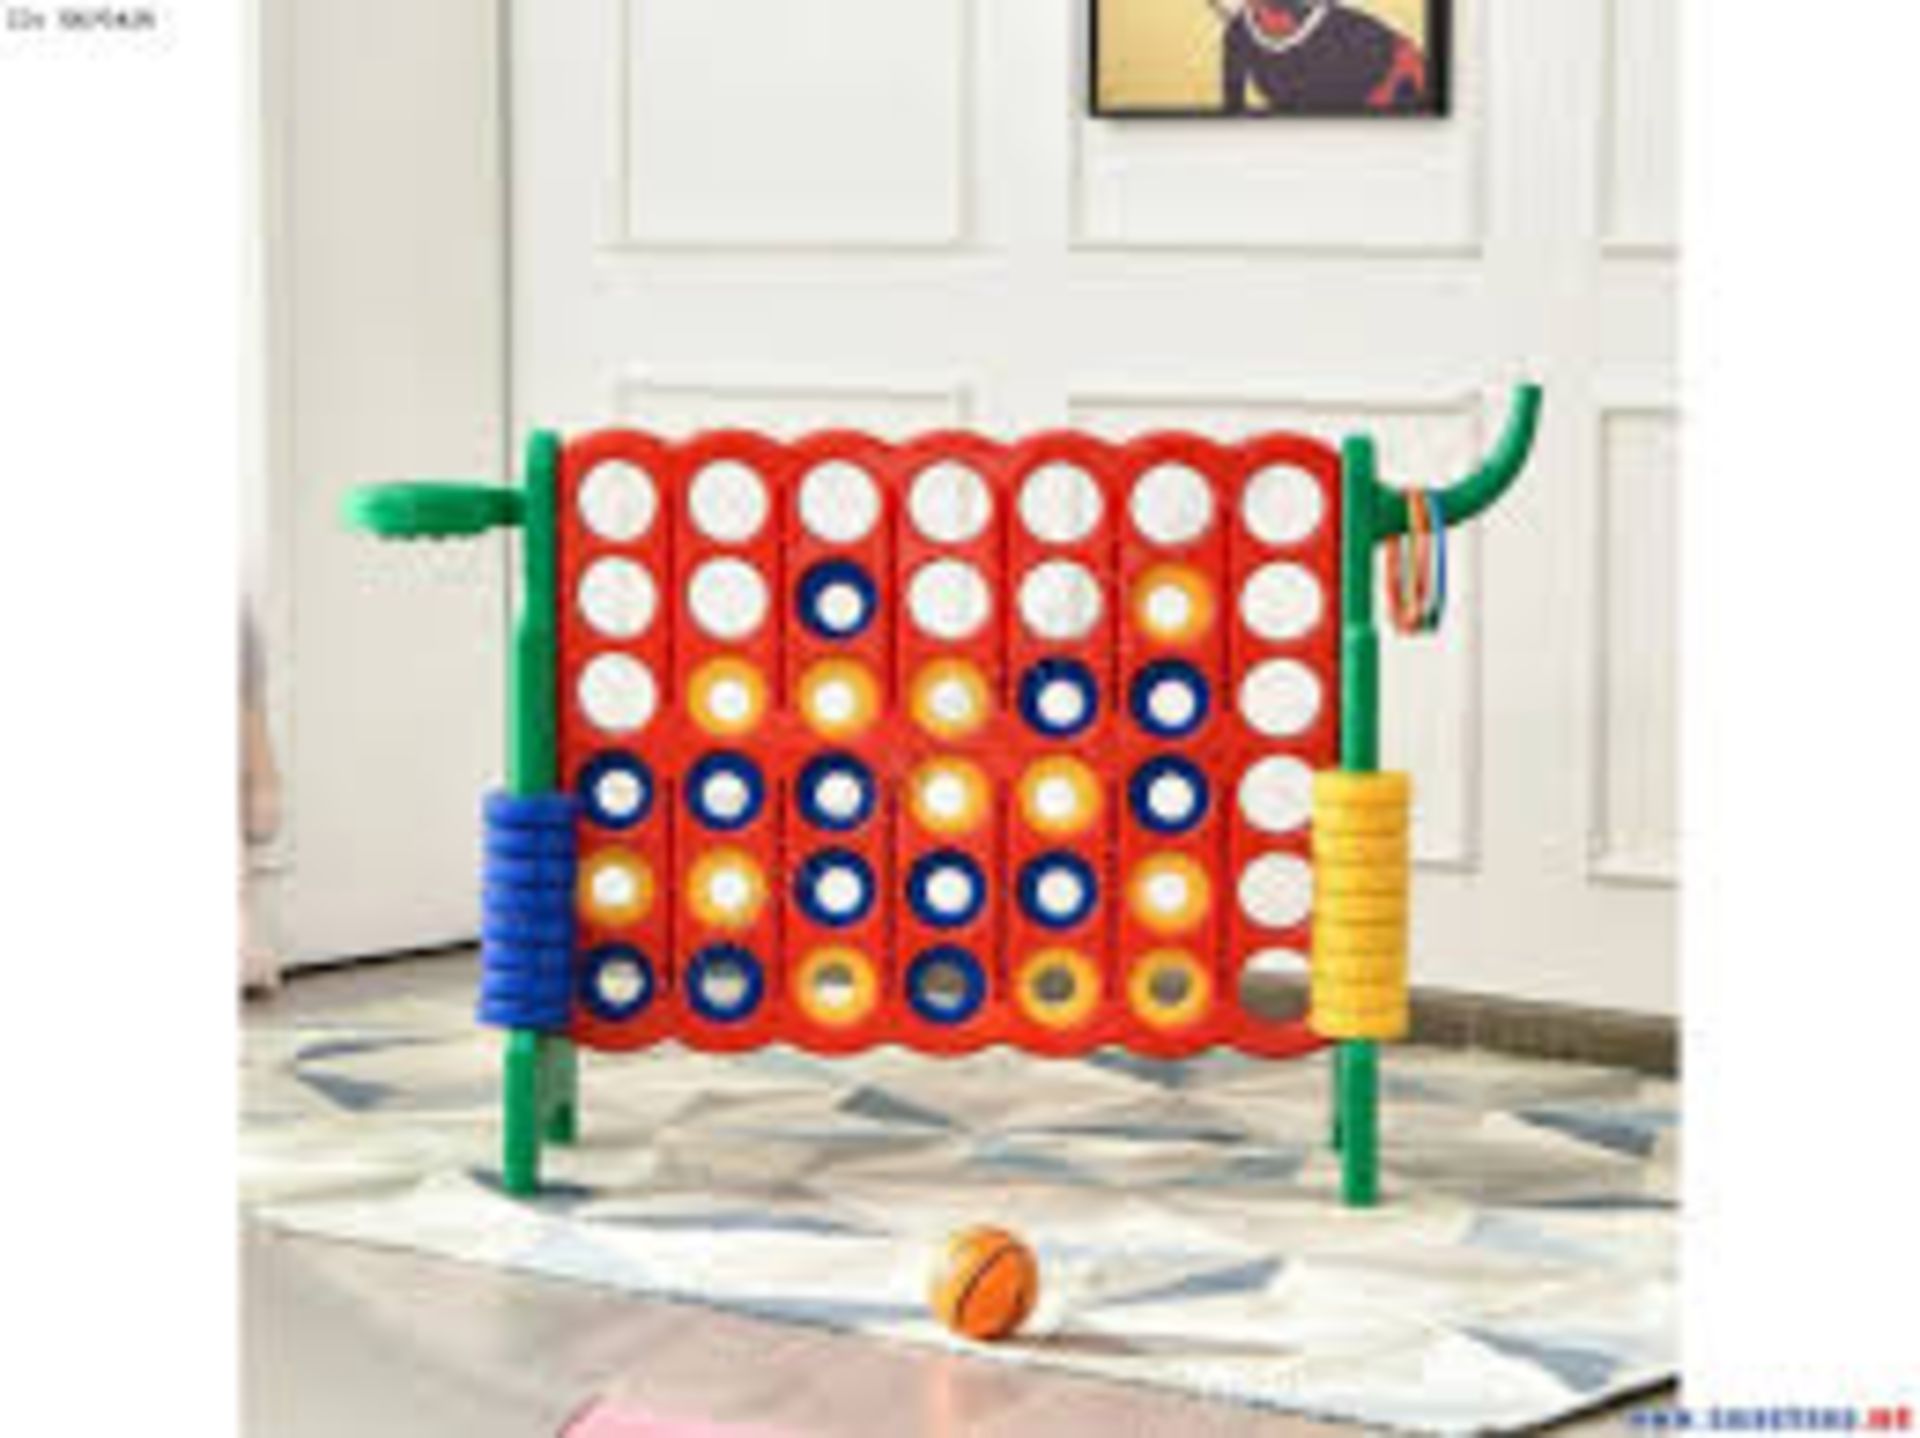 4-in-A Row Giant Game Set w/Basketball Hoop for Family Green - ER54